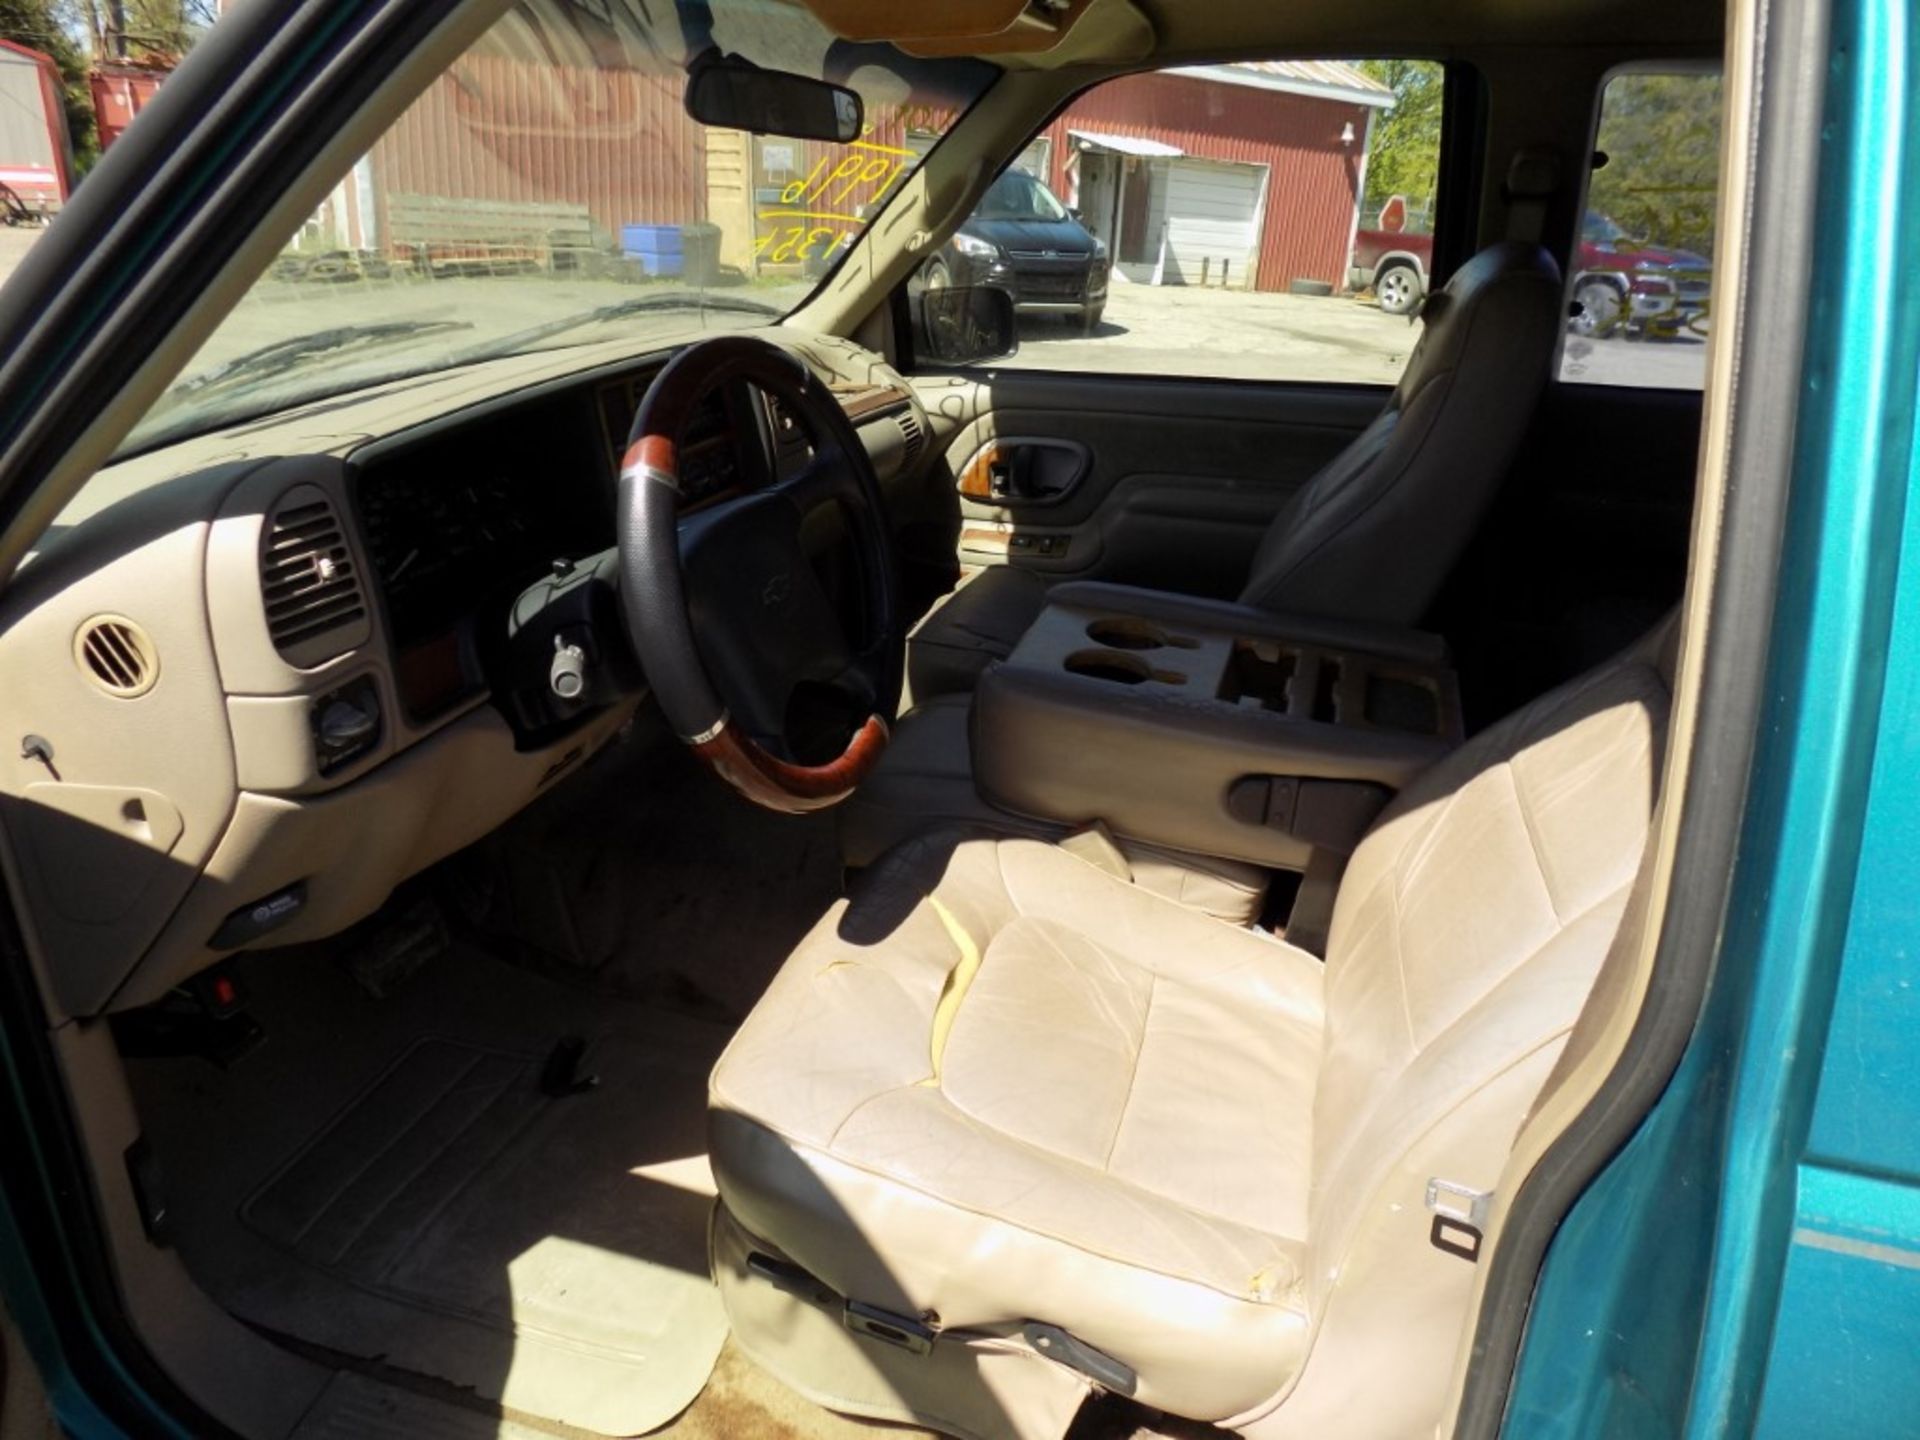 1996 Chevrolet Silverado 3500 Ext. Cab, 2 WD Diesel, Centurion Conversion Package with Leather, - Image 5 of 5